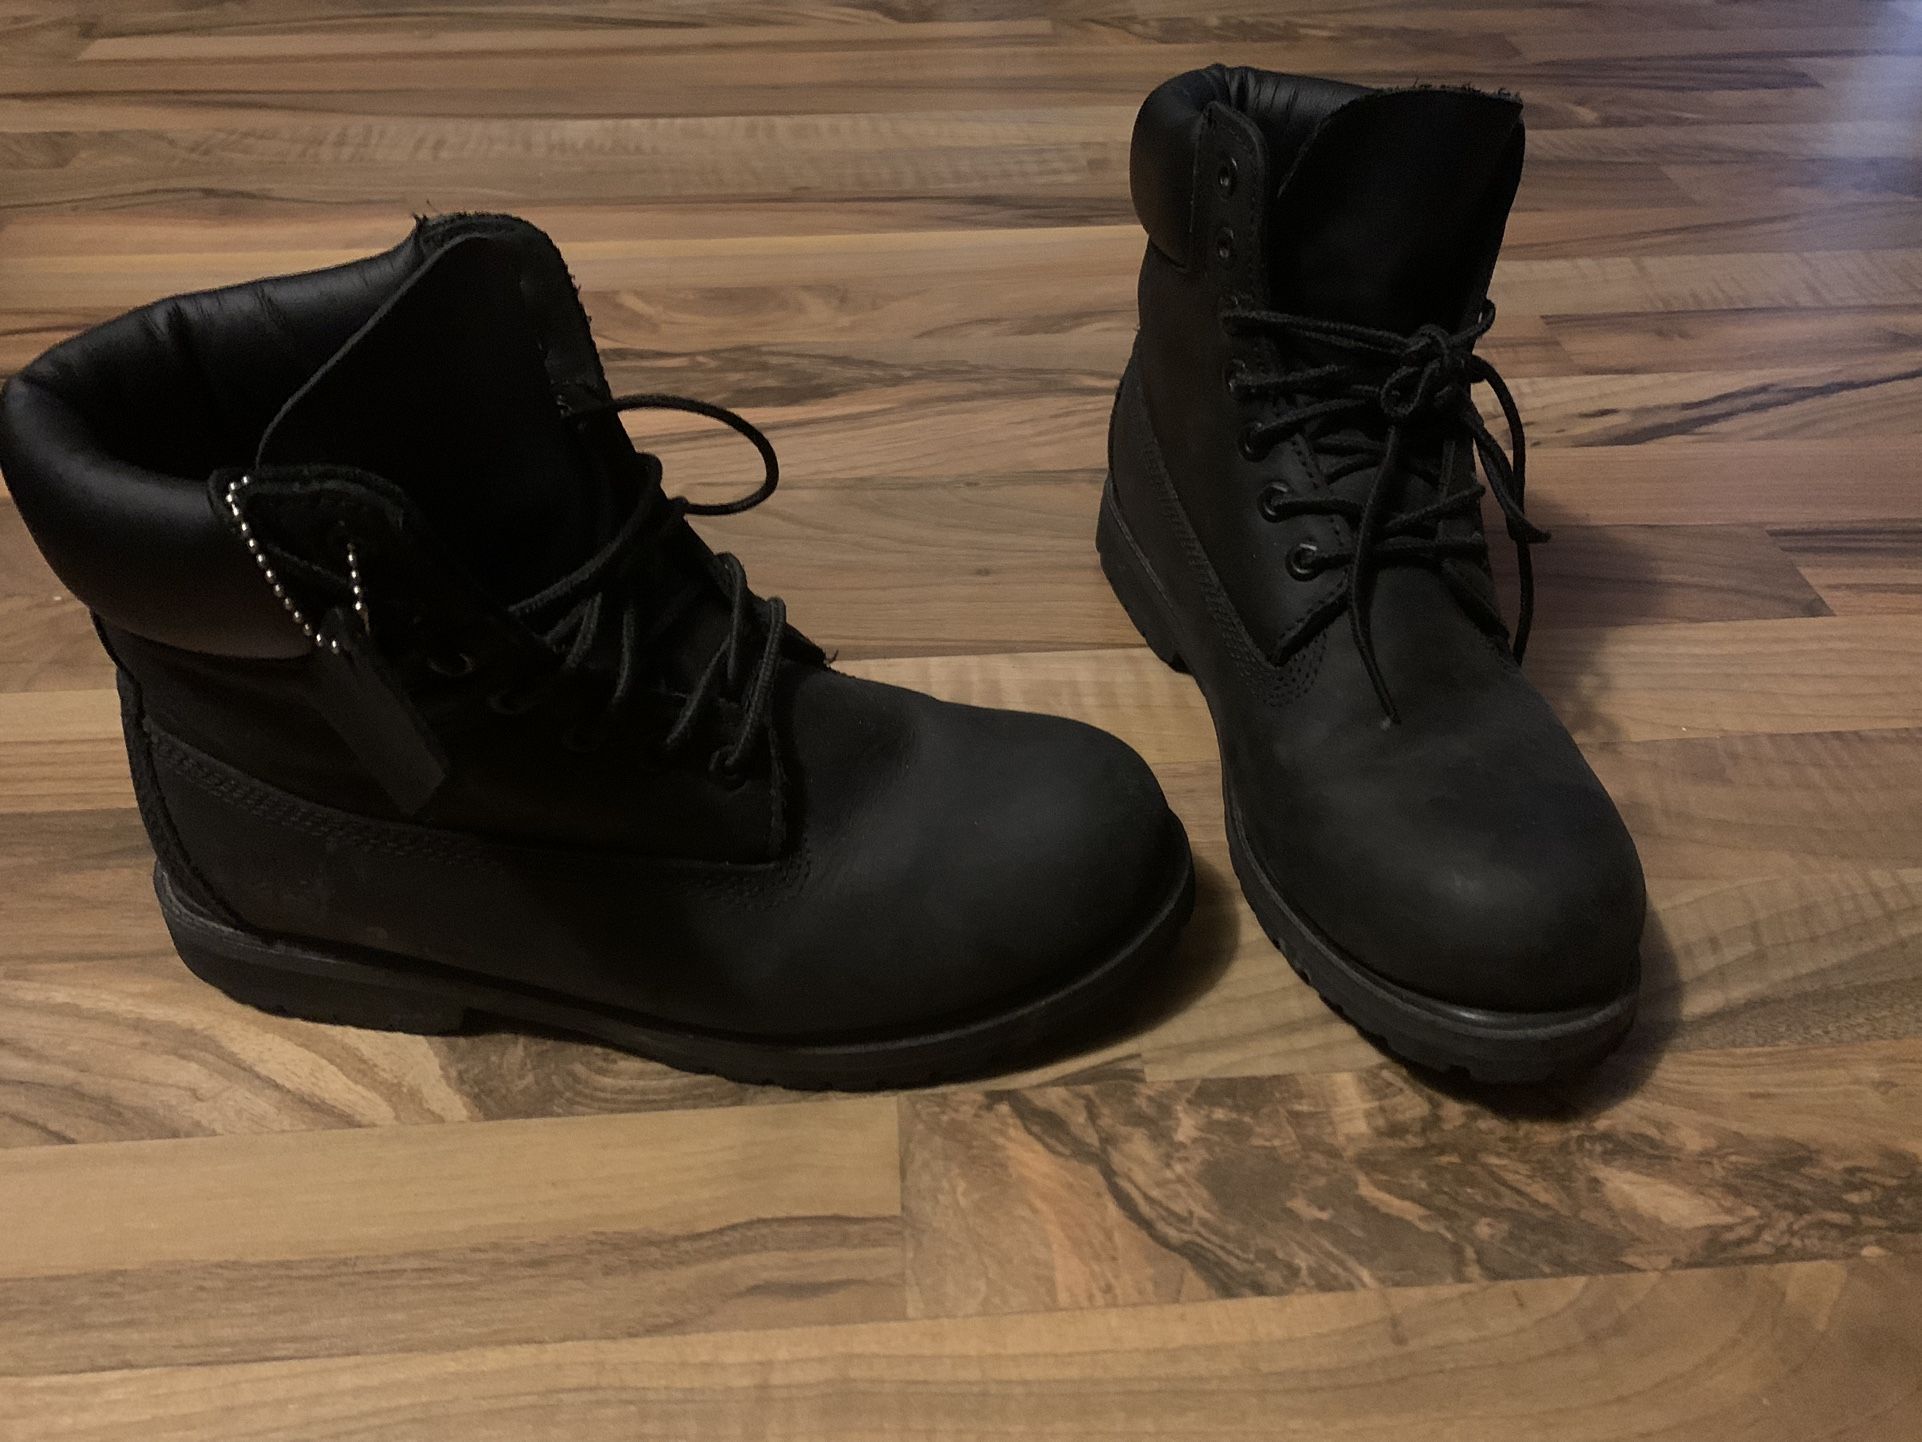 Black Timberland boots use but in good condition size 10 $50